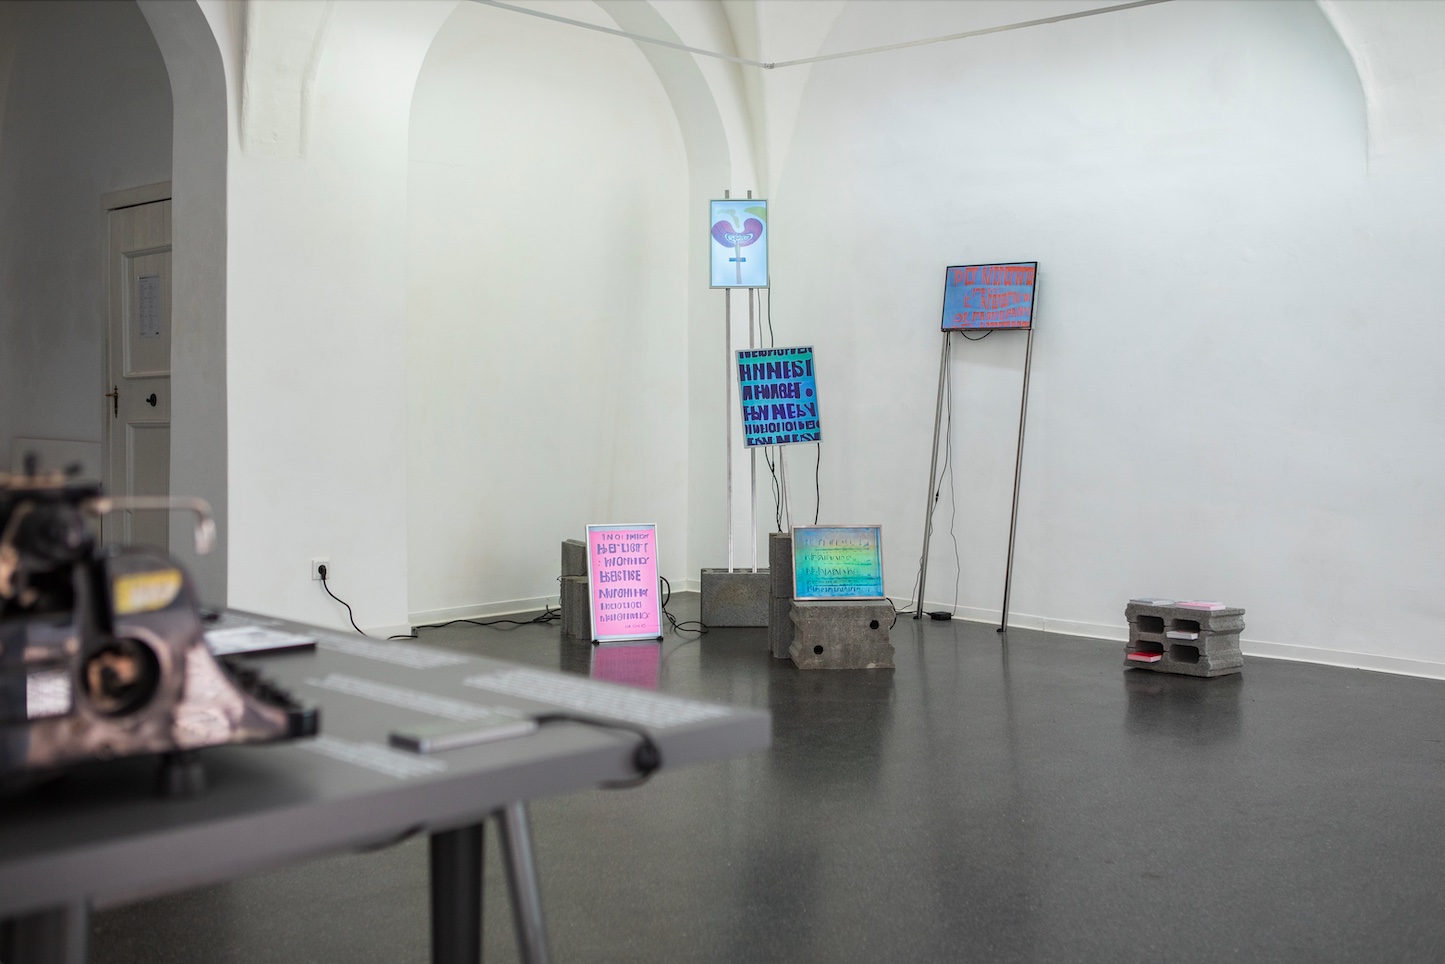 Art exhibition with screens on sticks showing illegible text resembling protest signs